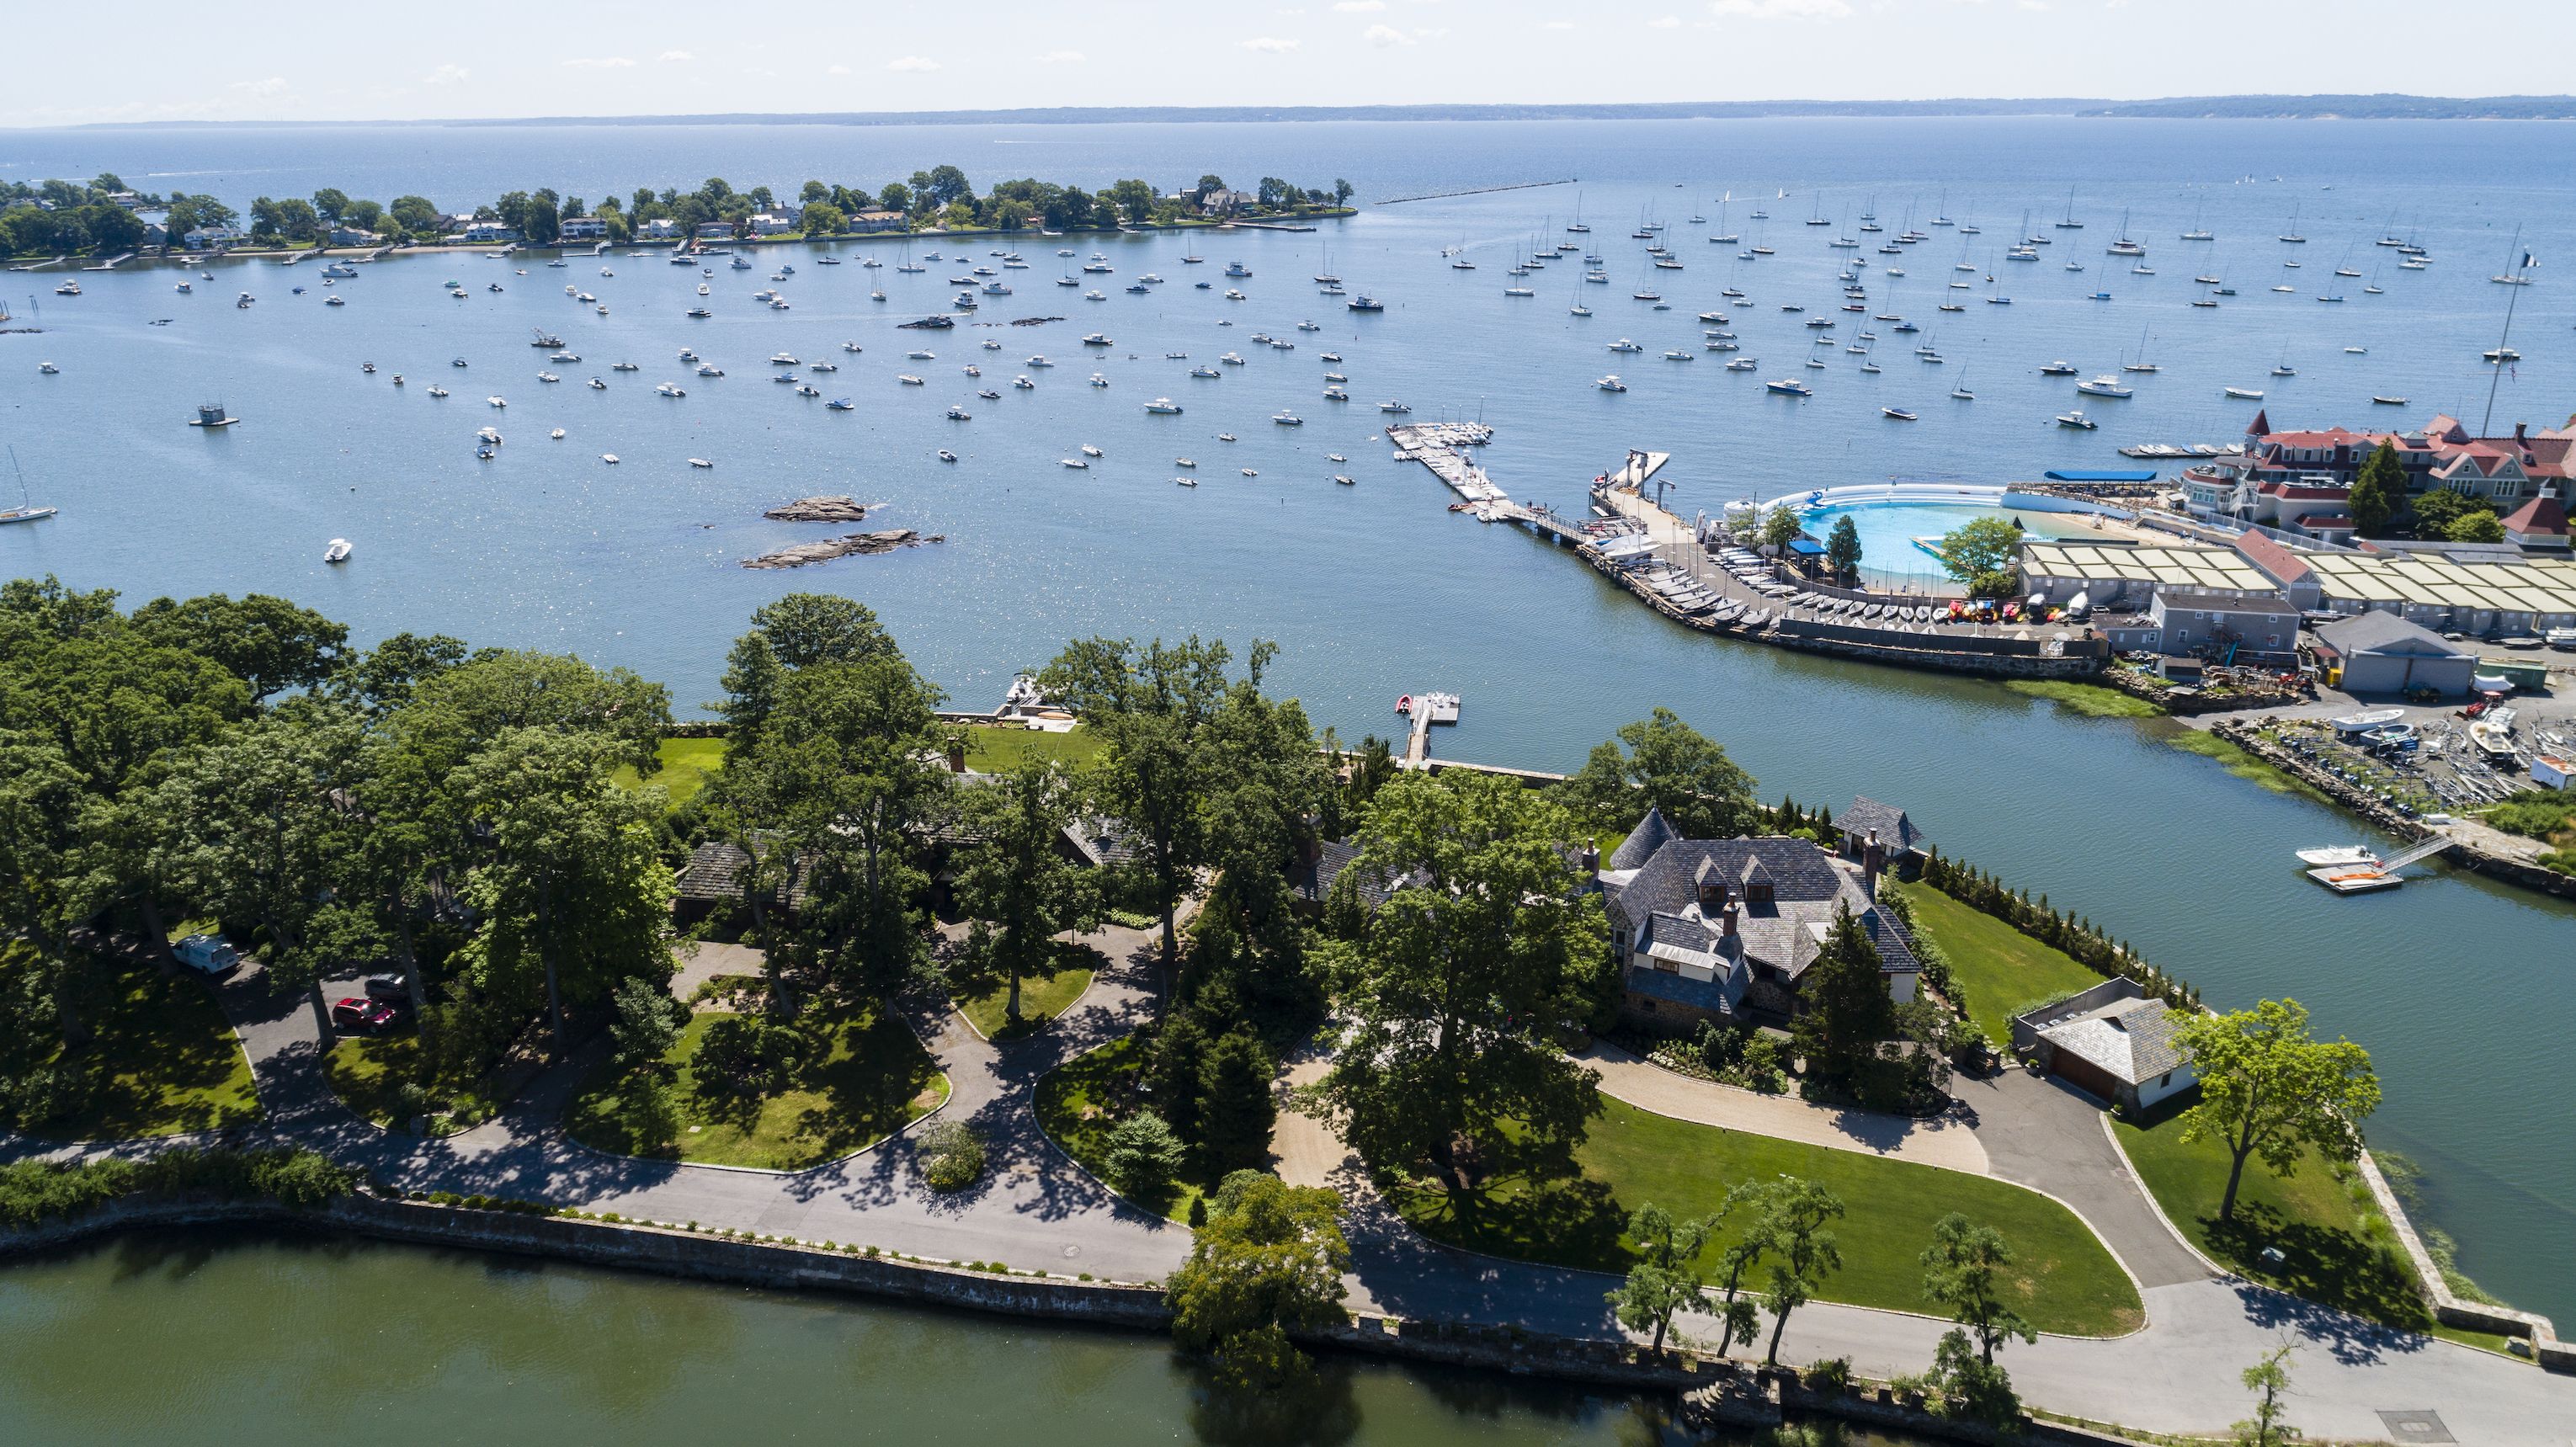 The aerial drone view of the marina in Larchmont, Westchester County, USA